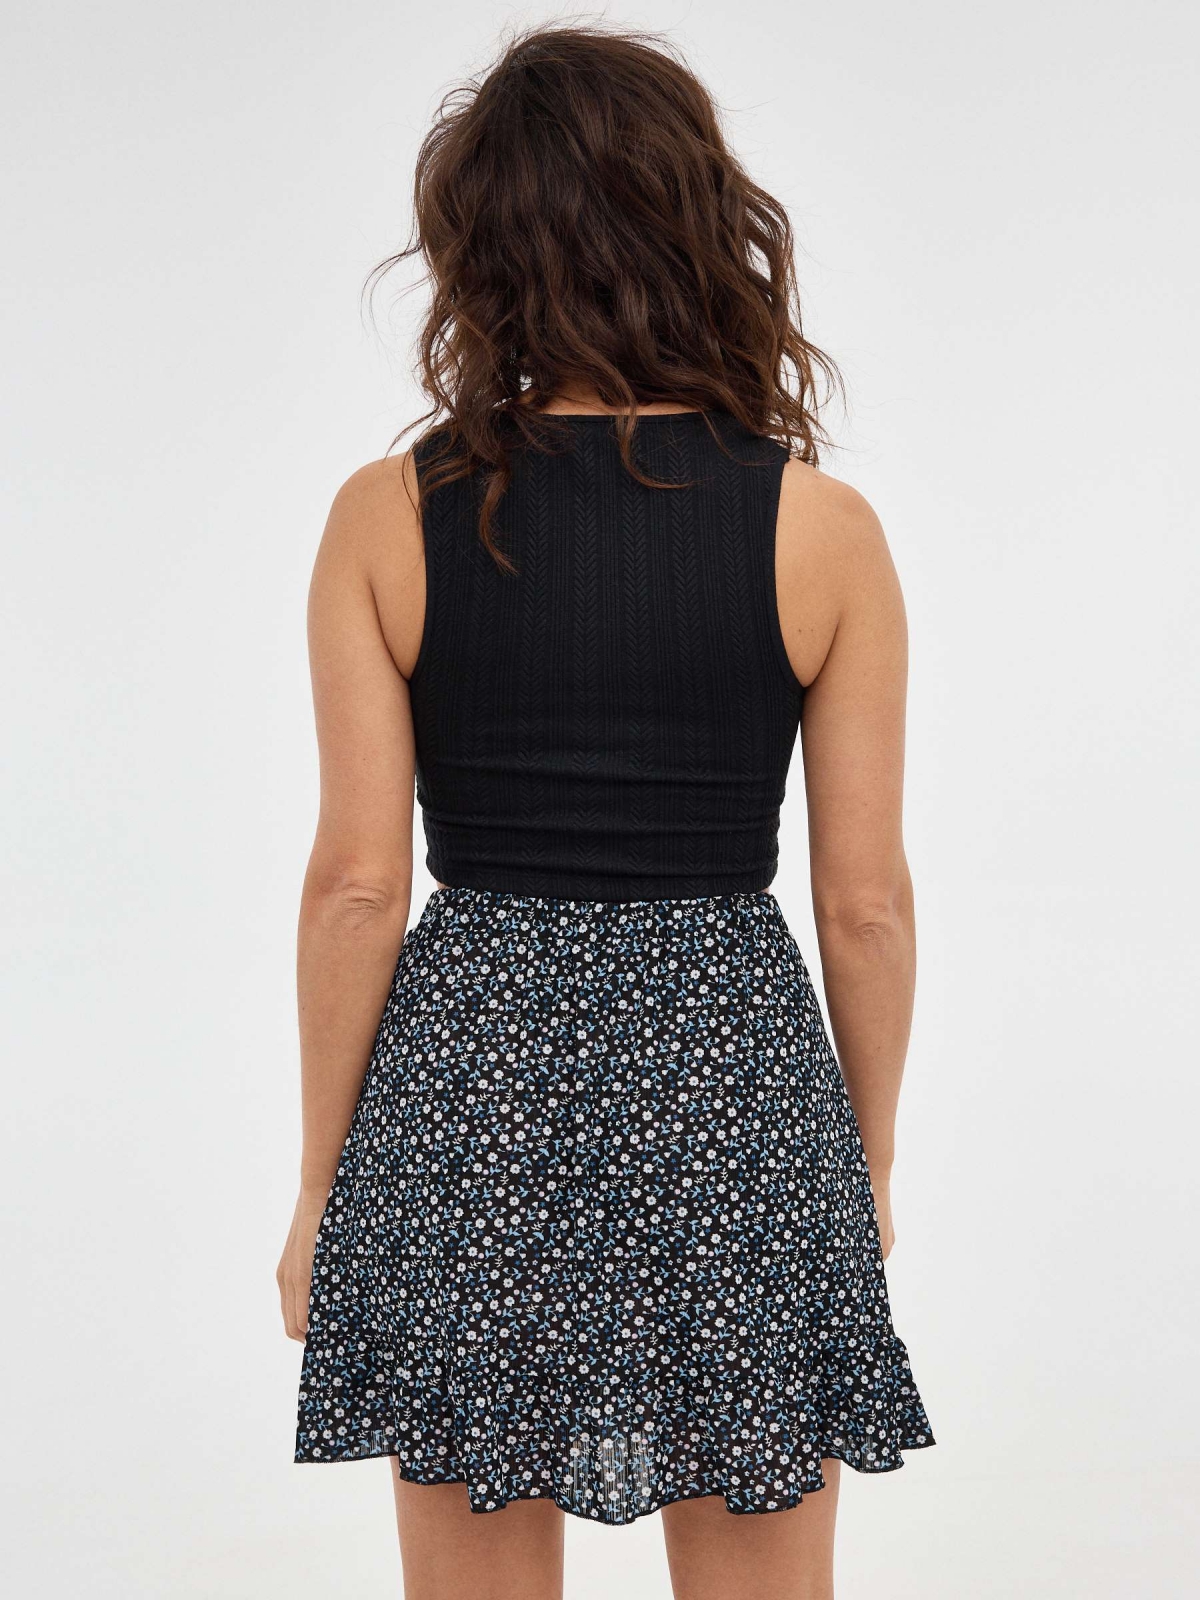 Ruffled wrap floral skirt black middle back view